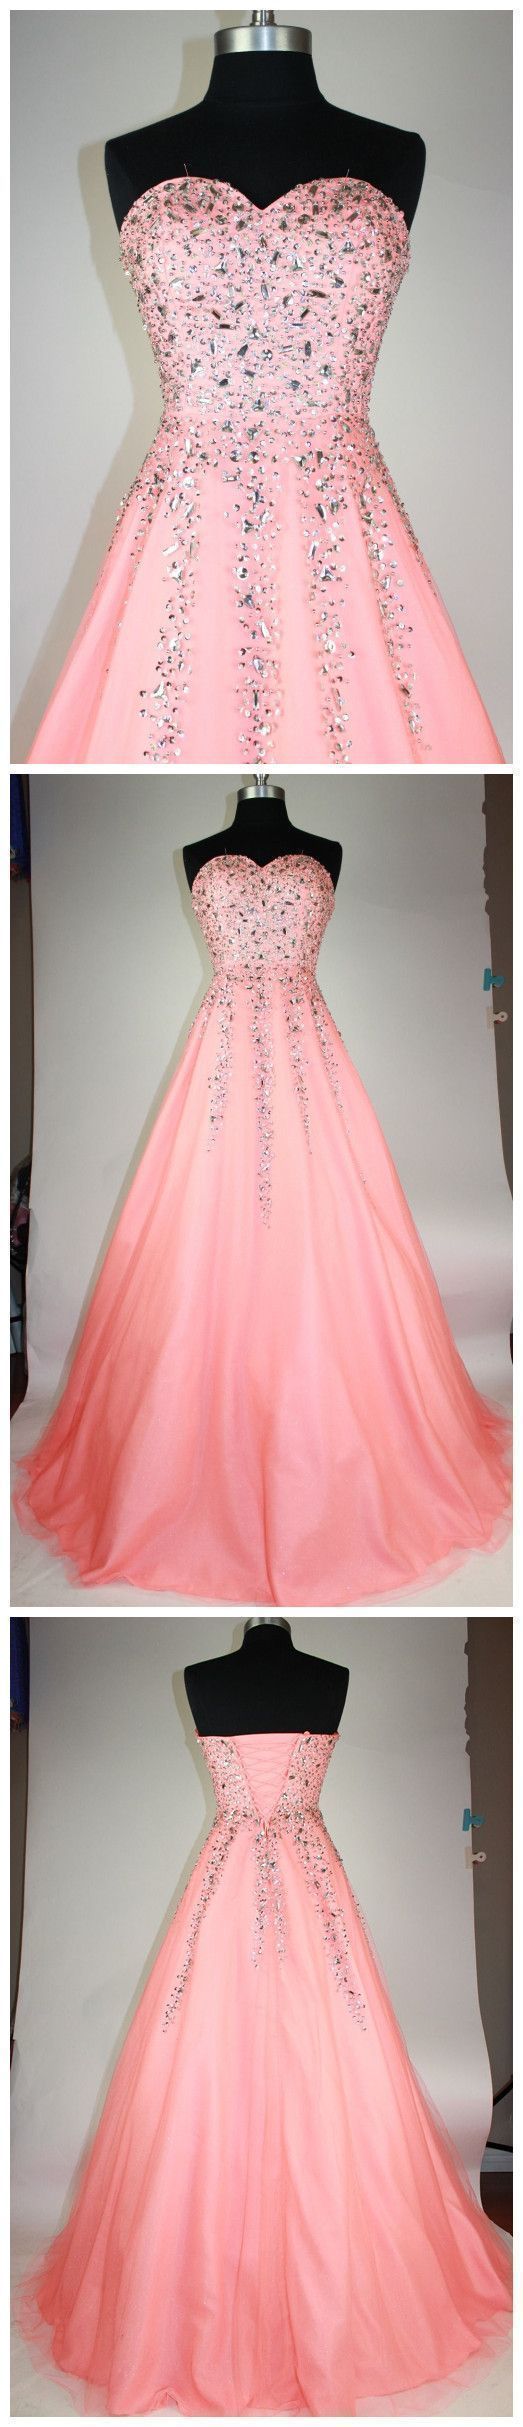 Tulle Crystal Beading Tulle A Line Prom Dress, Formal Long Homecoming Dress